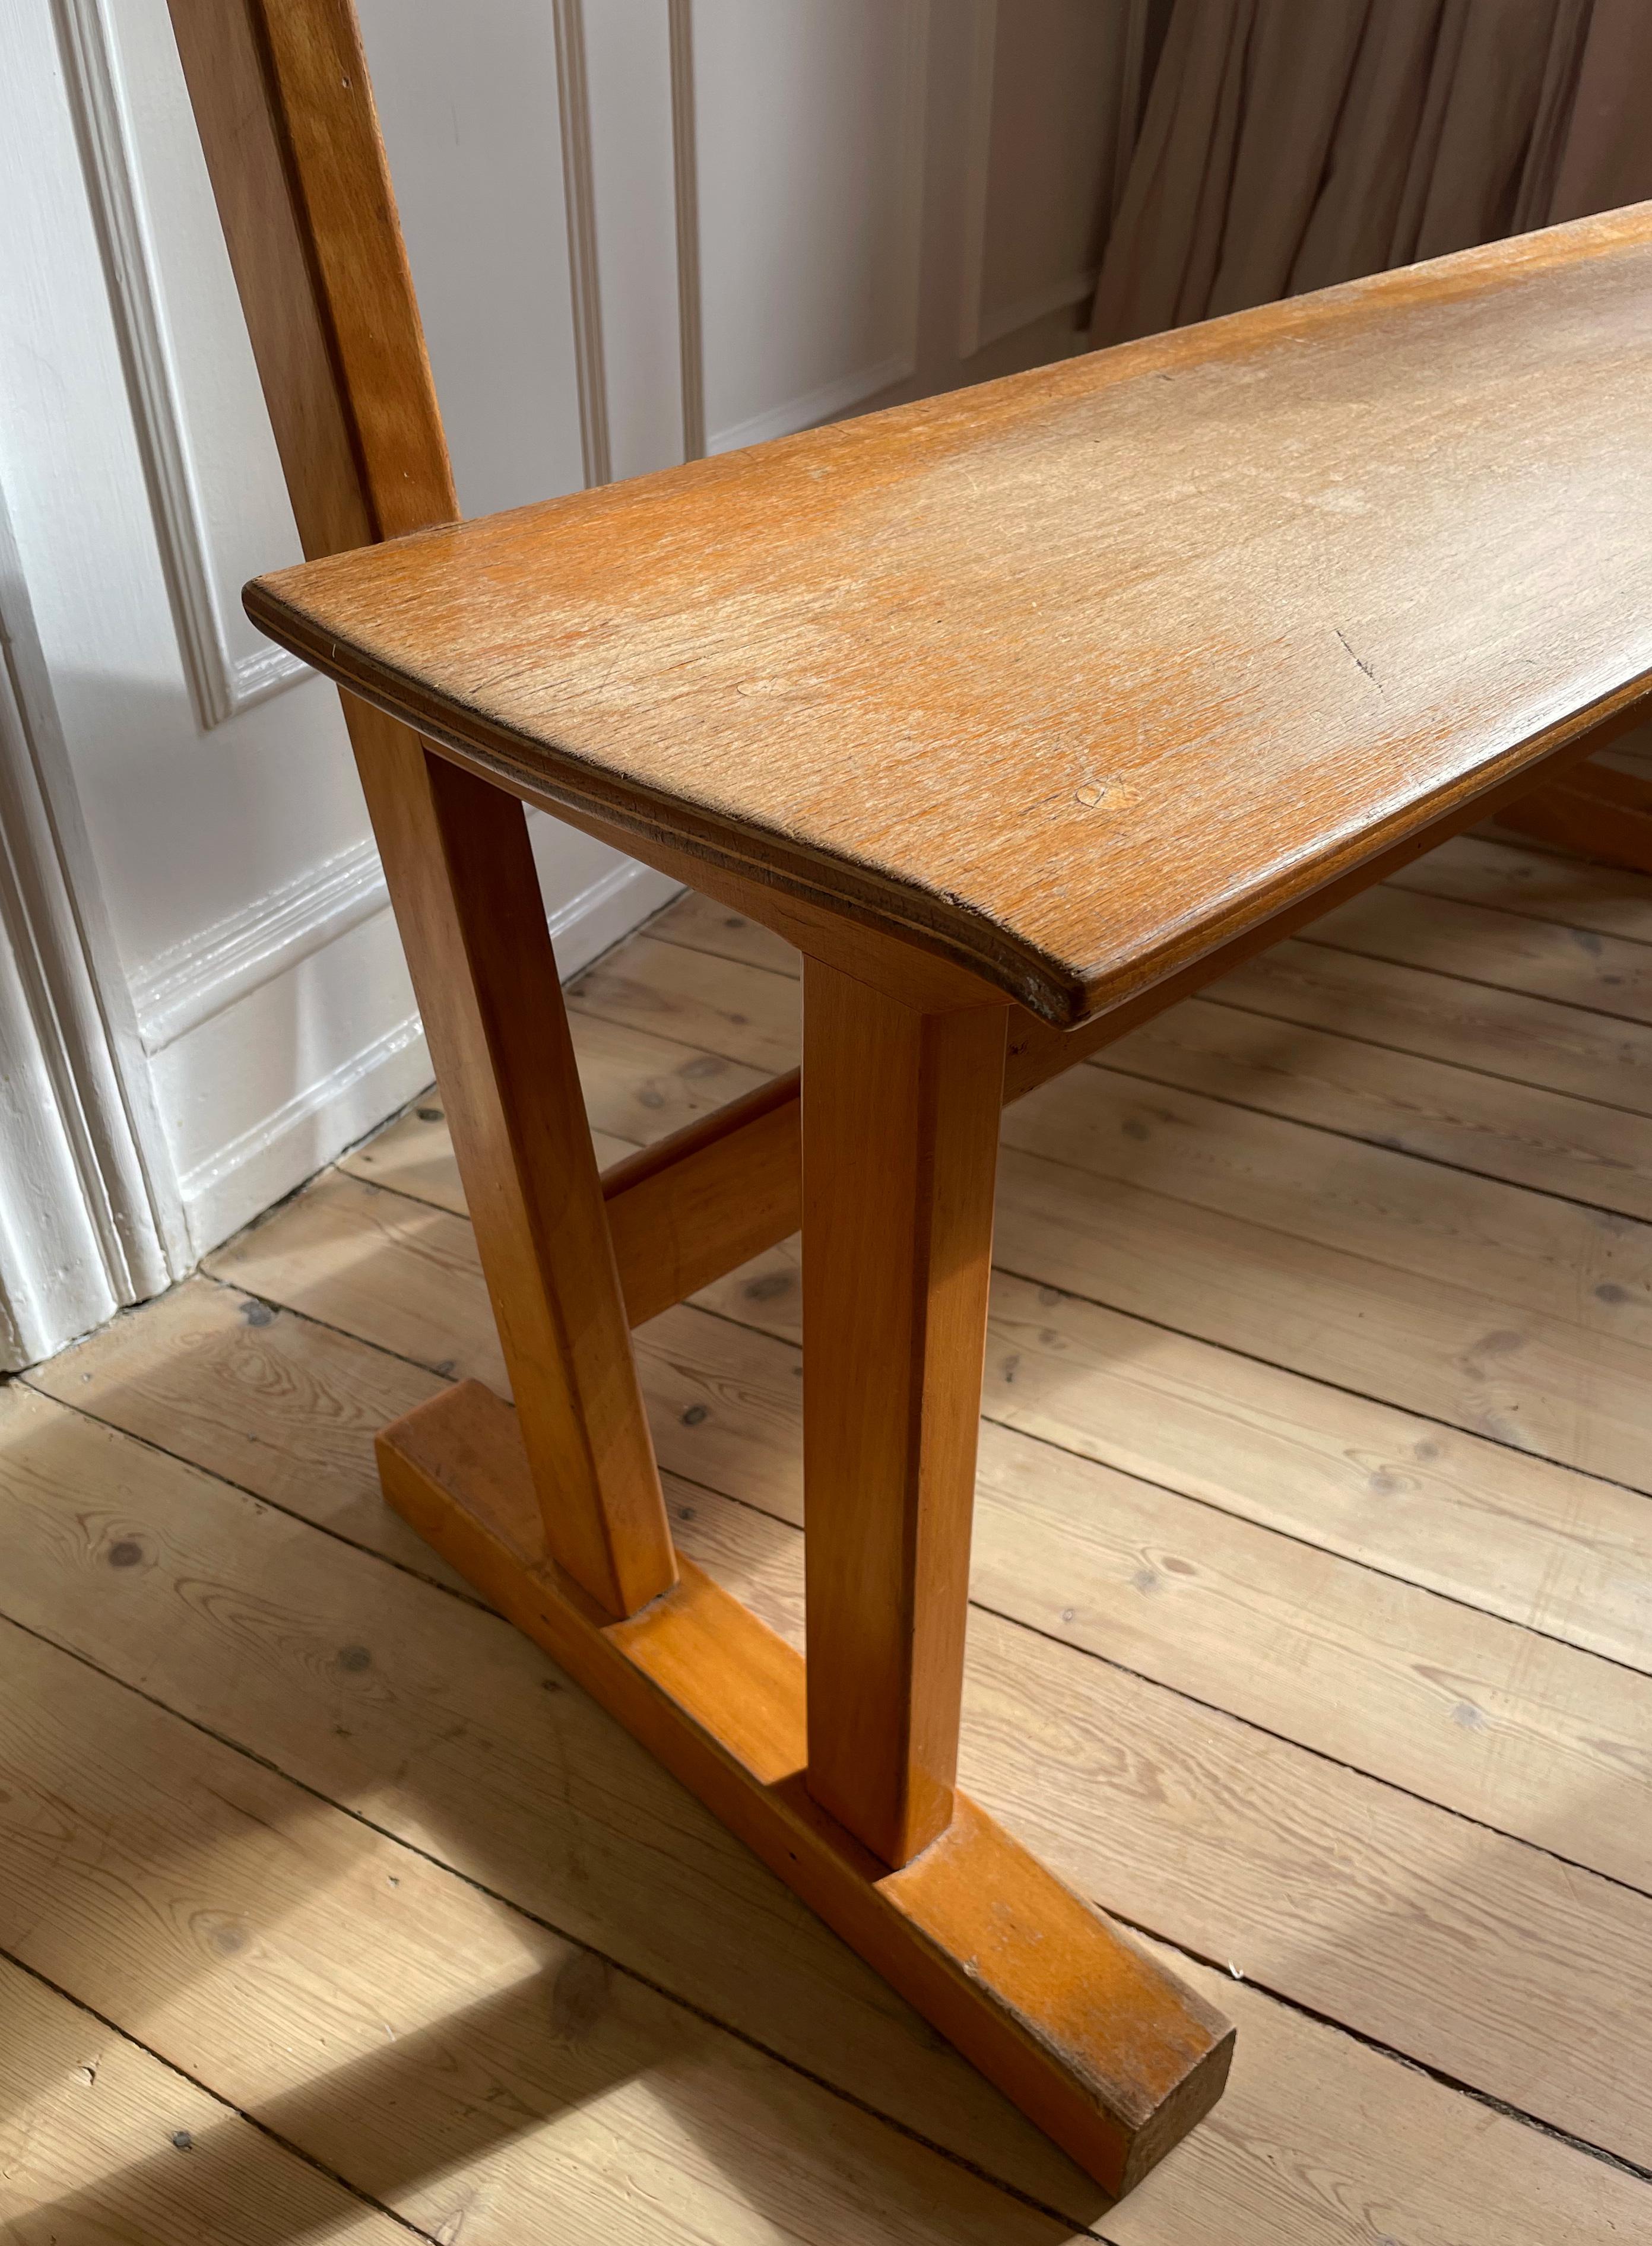 Danish Modern Hand-Crafted Wooden Bench, 1950s For Sale 9